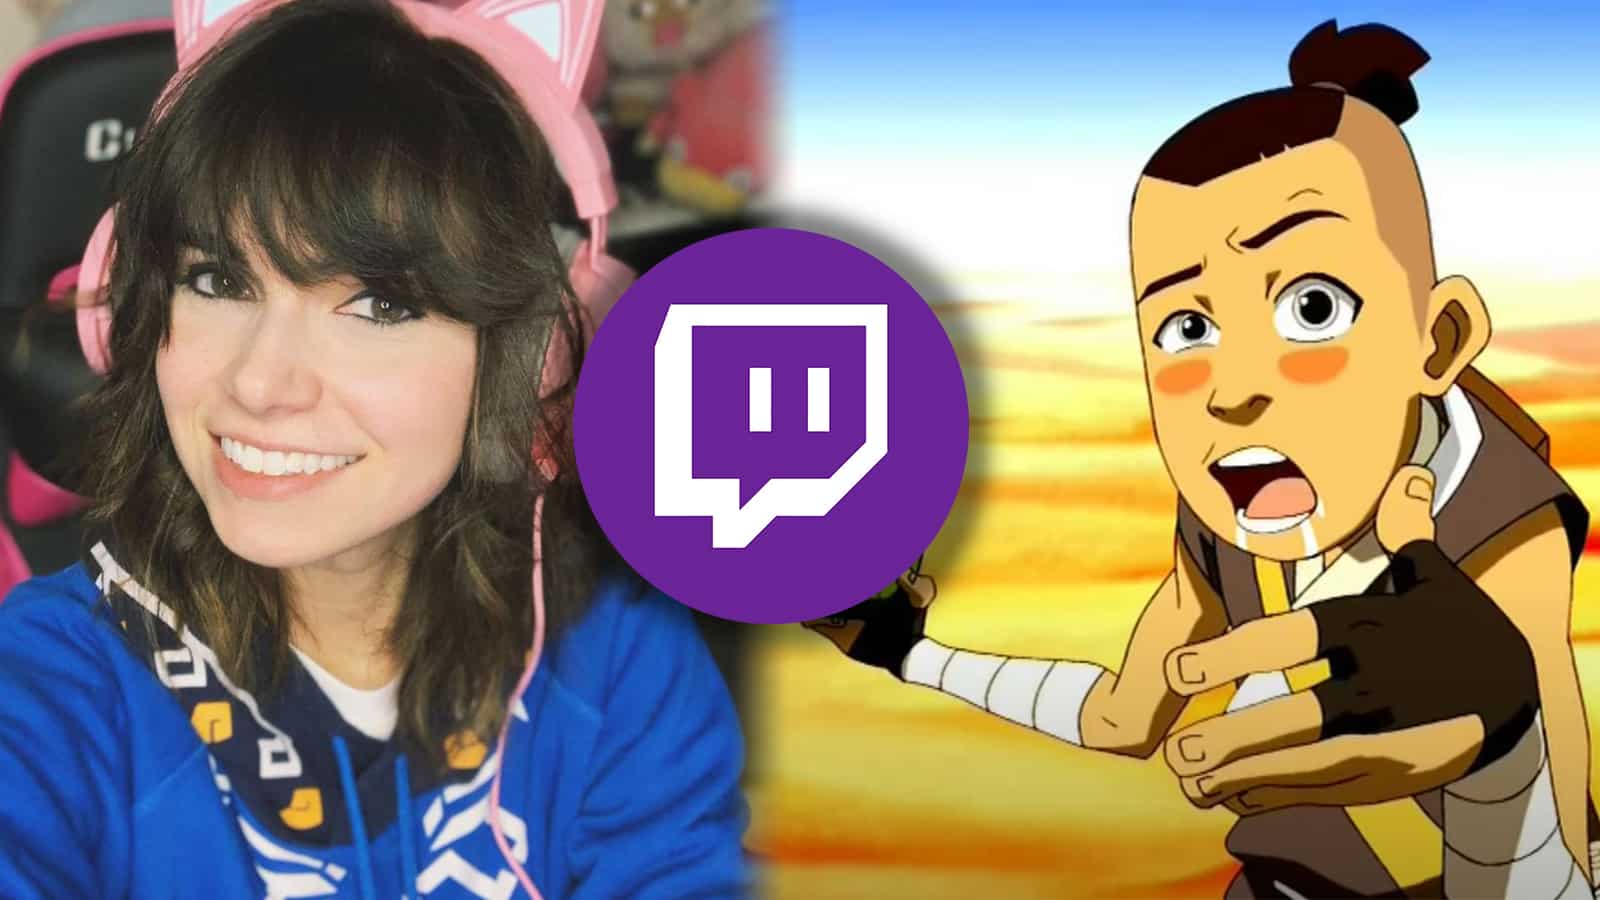 KaitlinWitcher stunned by seriously odd Twitch copyright ban